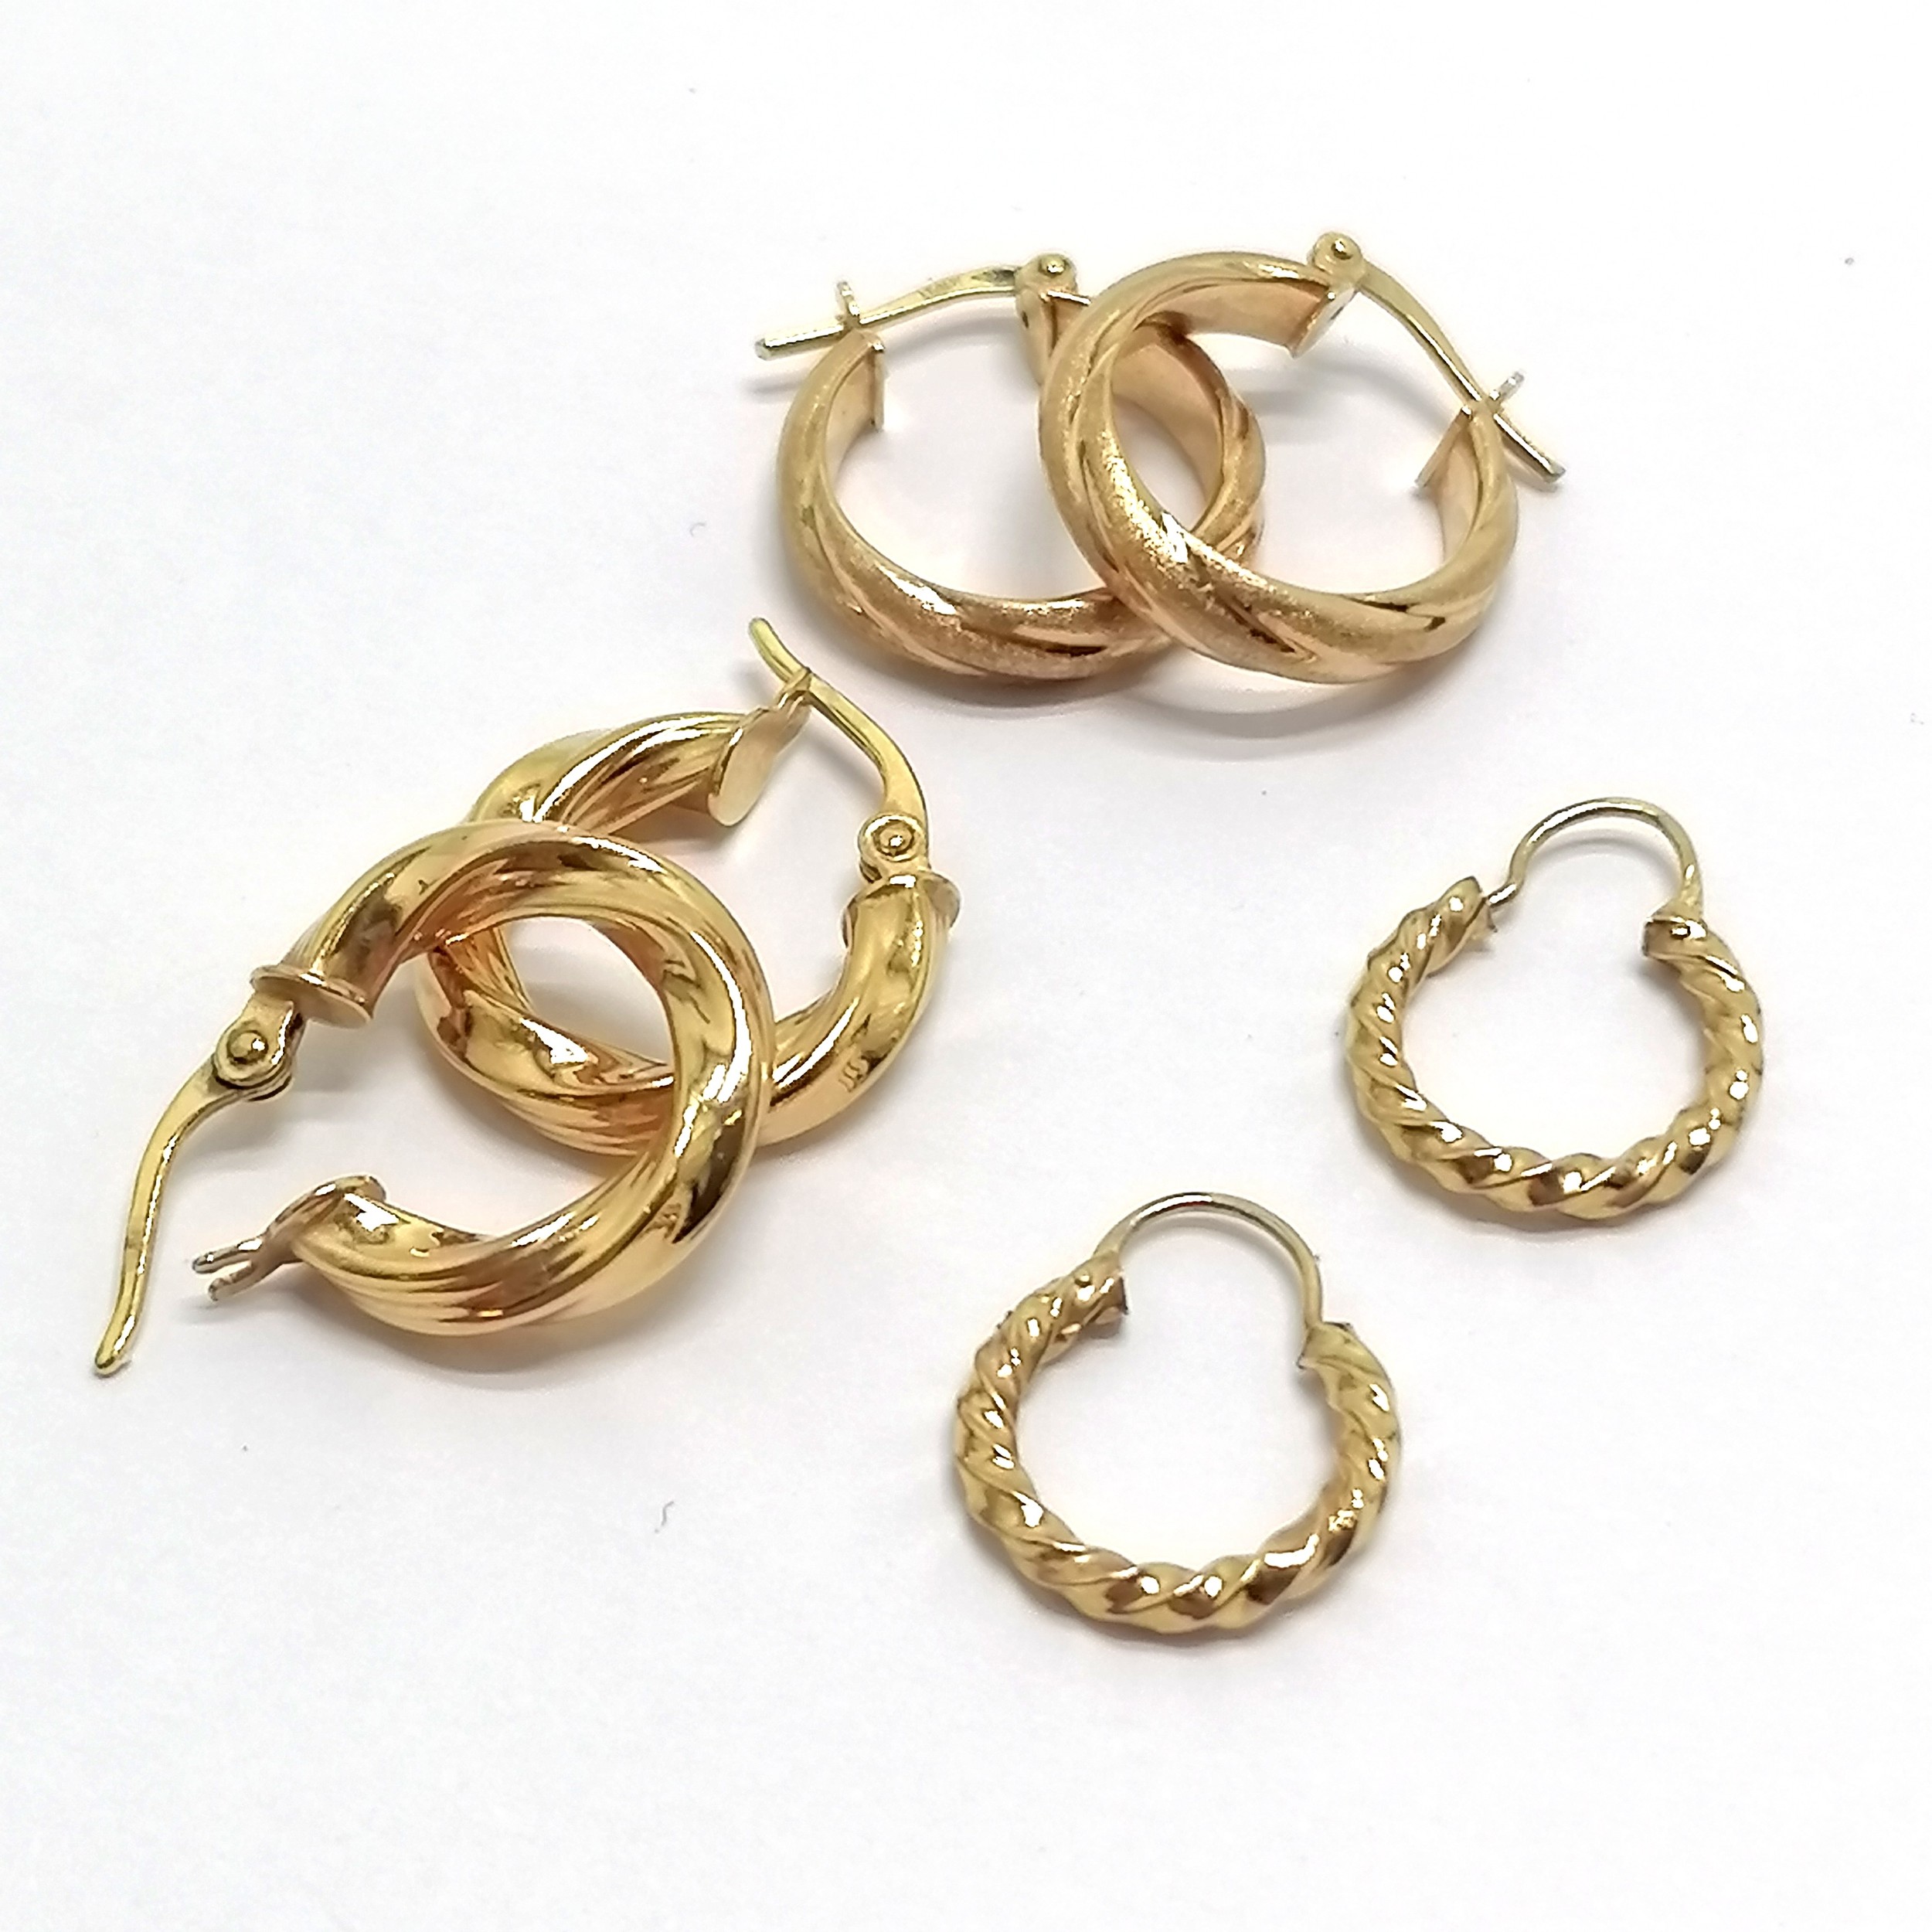 3 x 9ct marked gold pairs of hoop earrings - 4g total